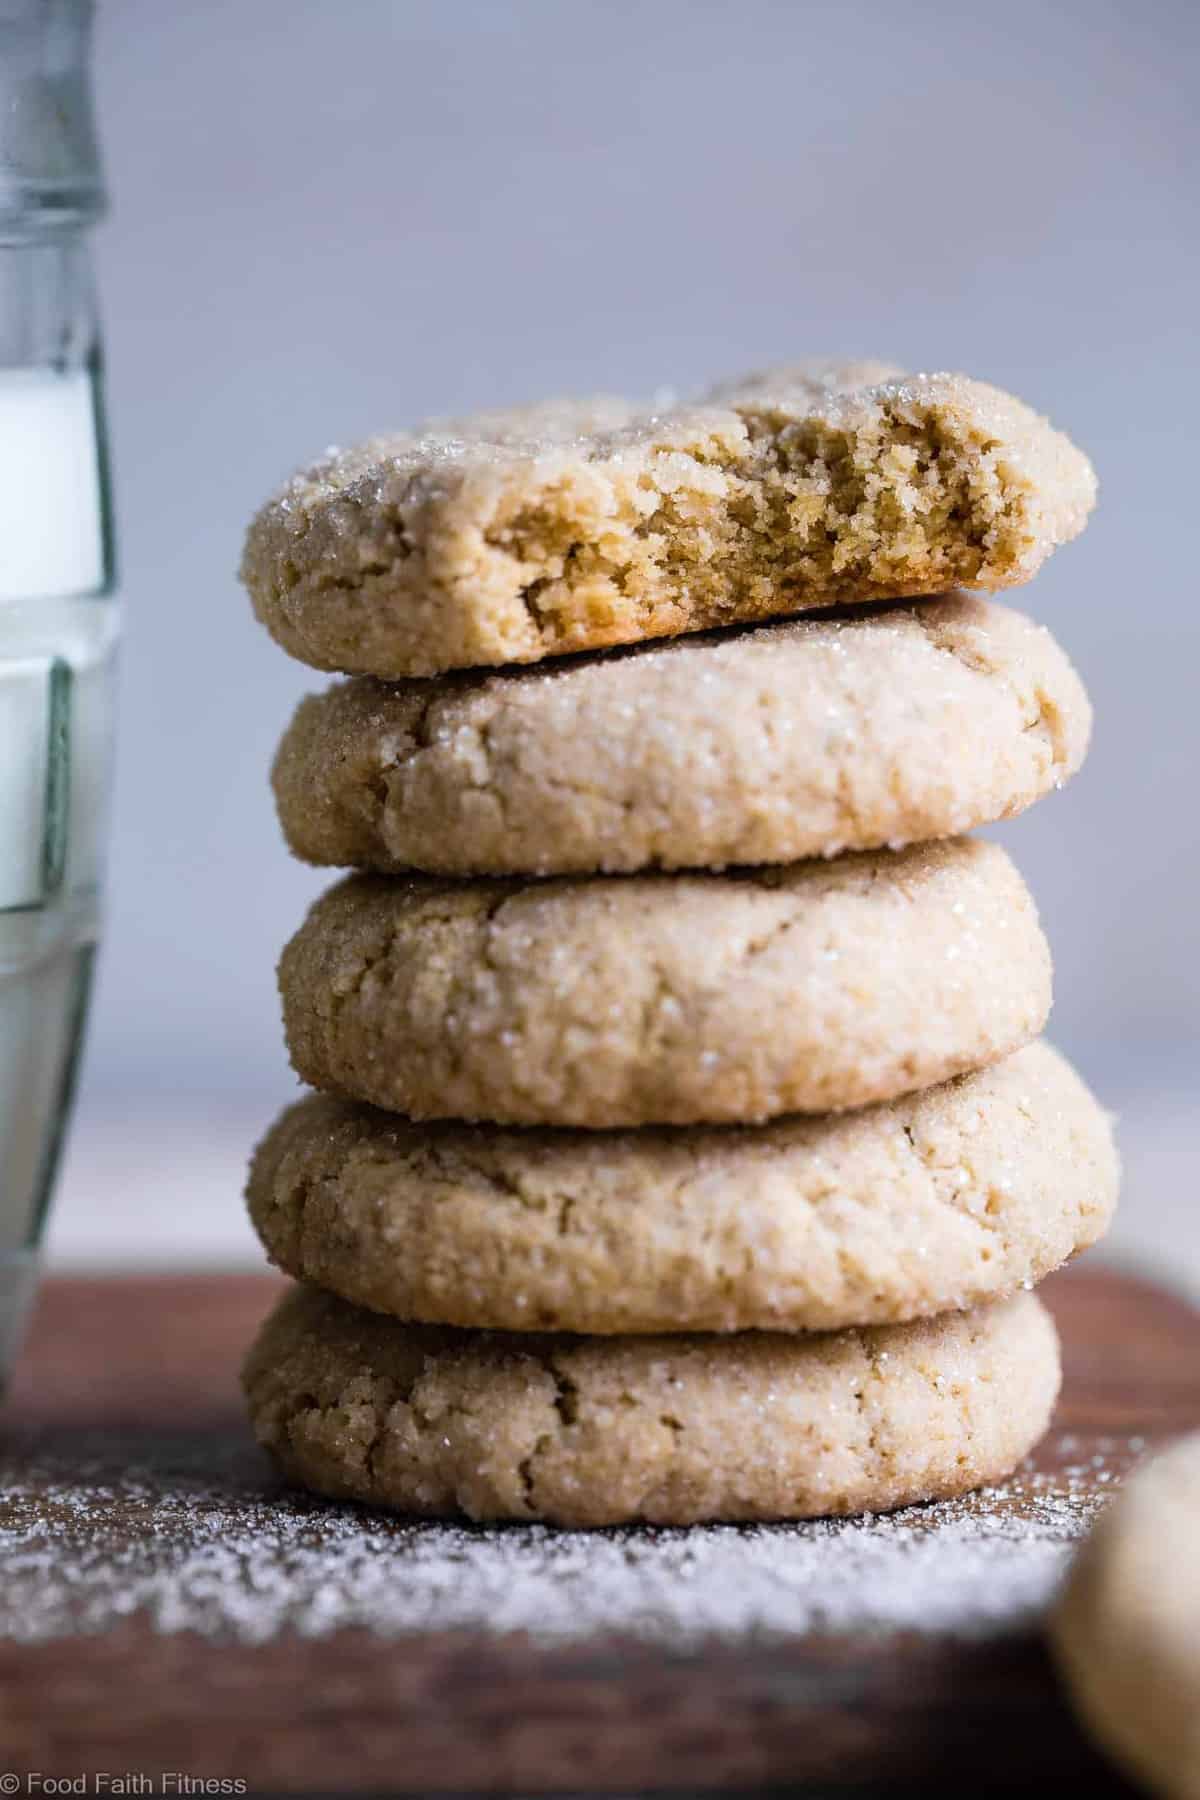 Soft Gluten Free Vegan Sugar Cookies - These SOFT and CHEWY Gluten Free Sugar Cookies are SO easy to make and seriously tasty! No one will believe these are healthy, dairy and egg free and only 115 calories! | #Foodfaithfitness | #vegan #healthy #dairyfree #eggfree #glutenfree